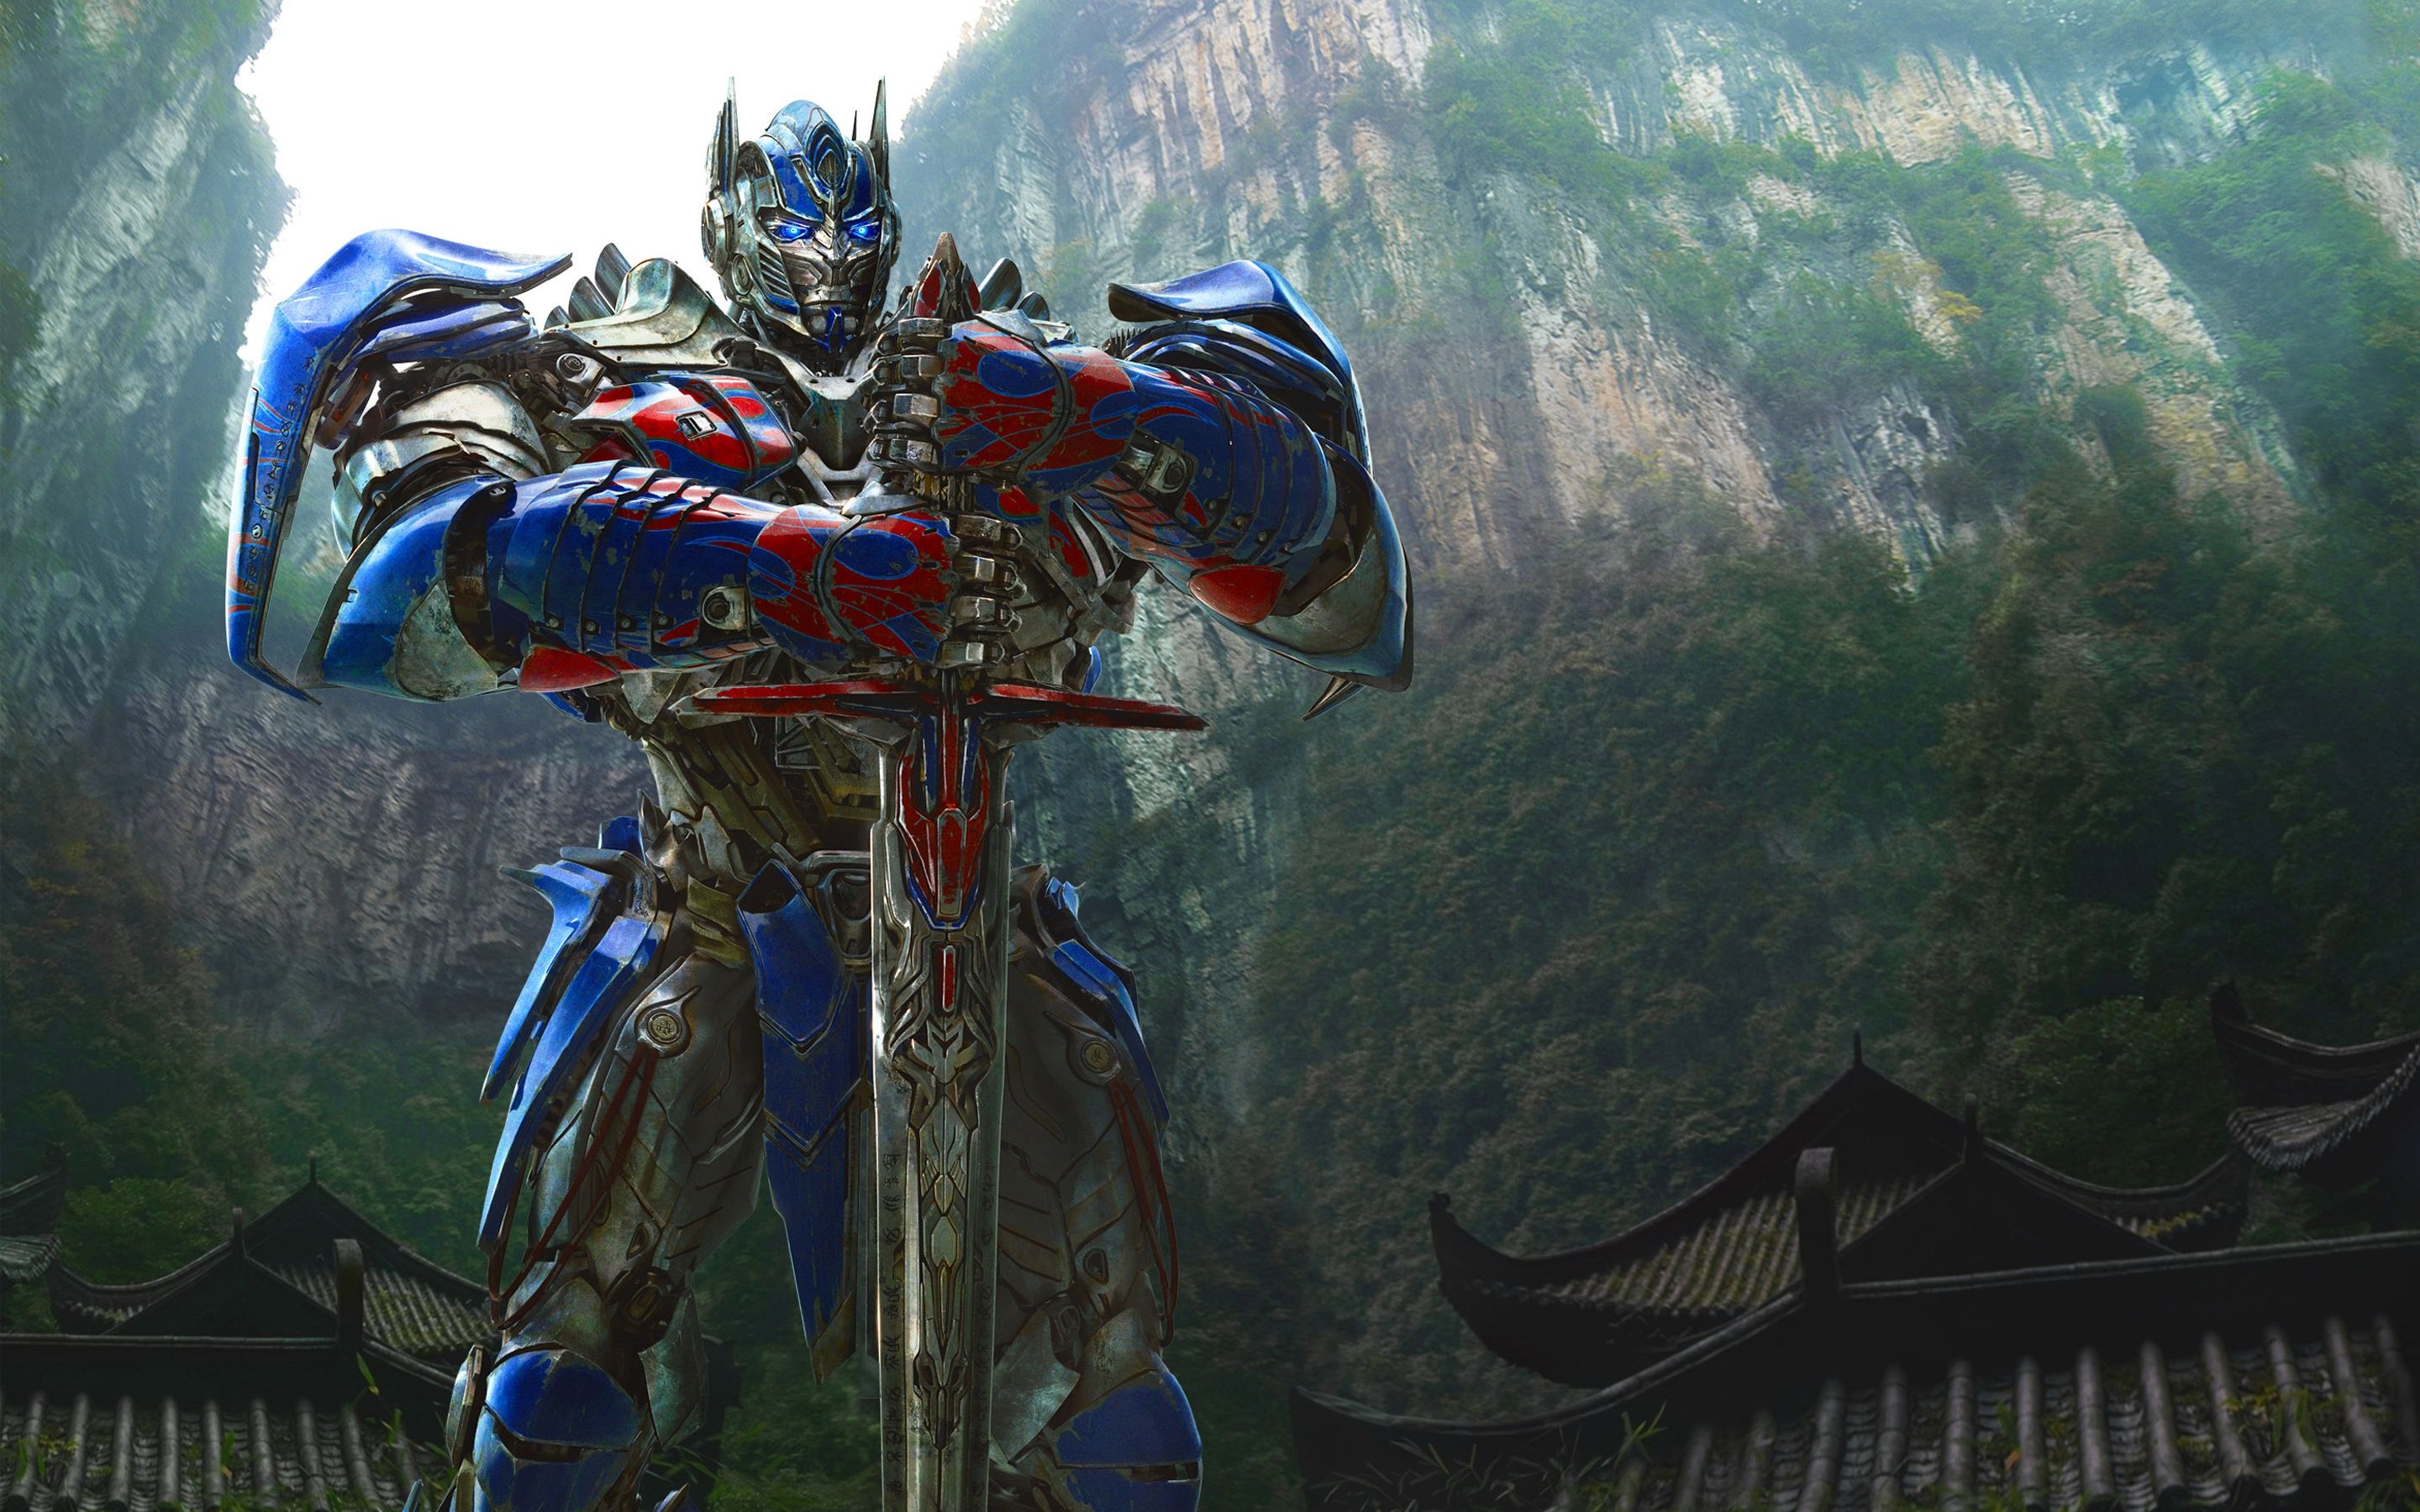 Transformers Wallpapers - Page 1 - Hd Wallpapers - Transformers Hd , HD Wallpaper & Backgrounds